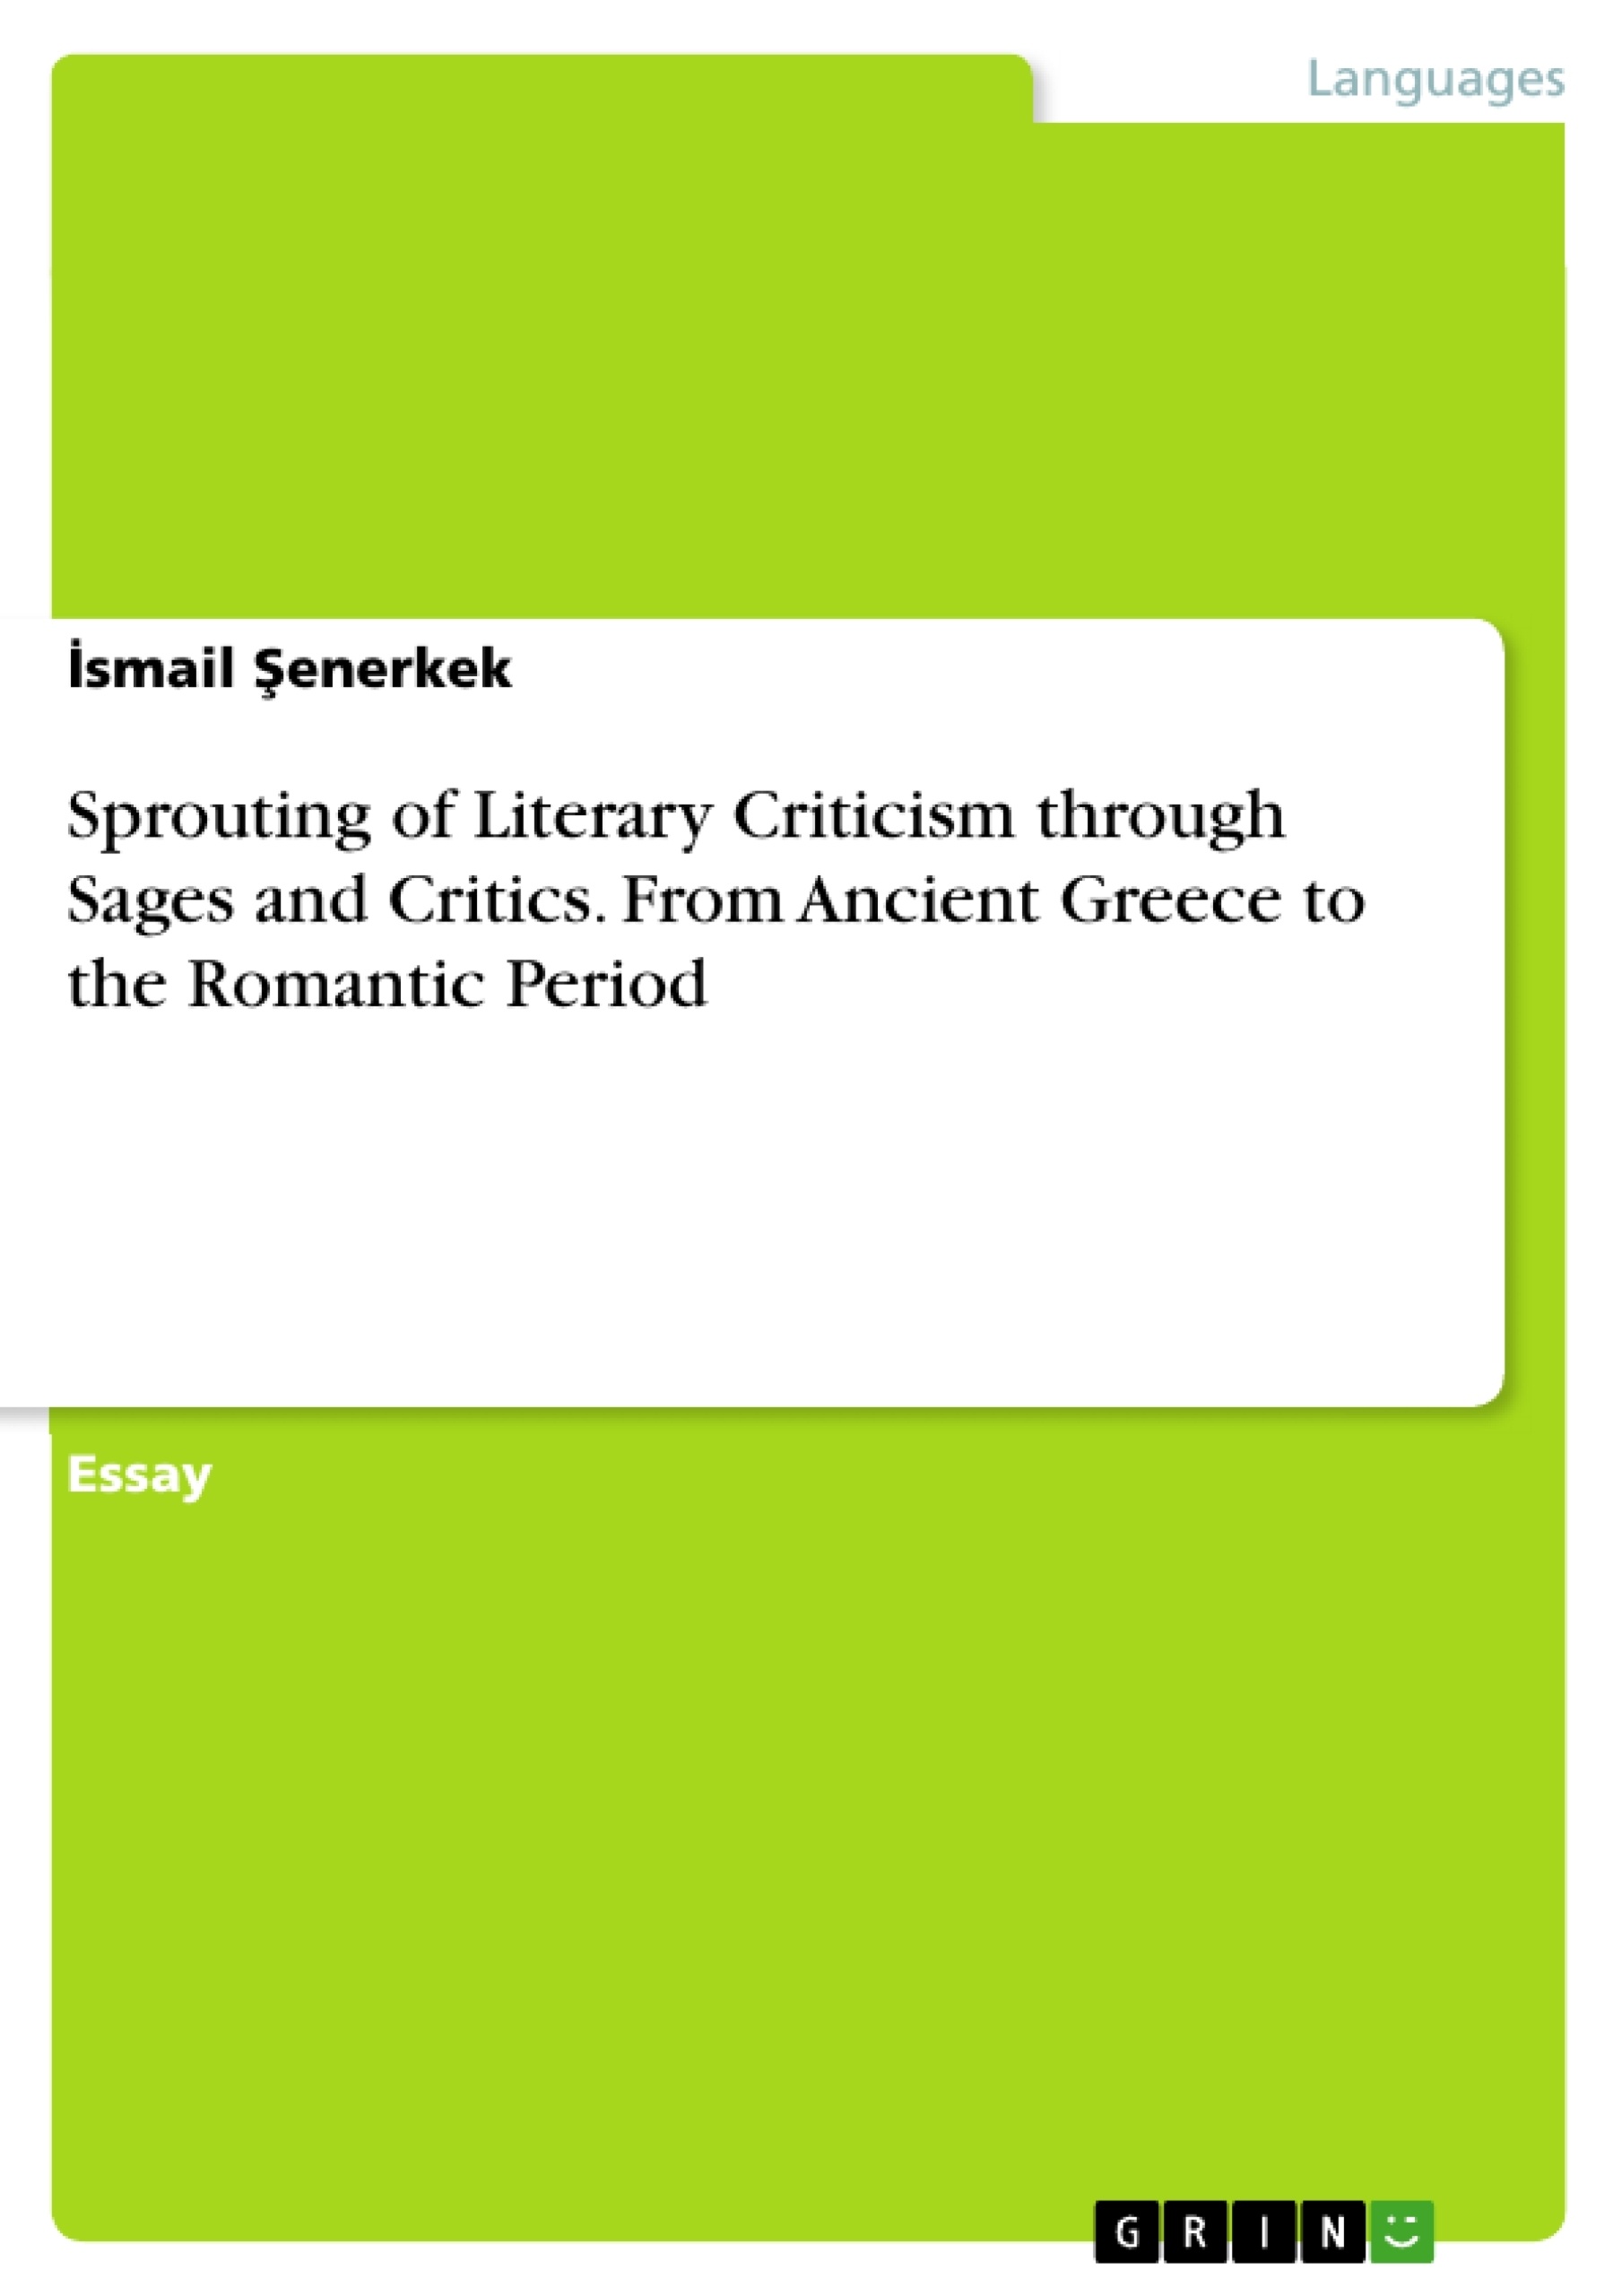 Título: Sprouting of Literary Criticism through Sages and Critics. From Ancient Greece to the Romantic Period